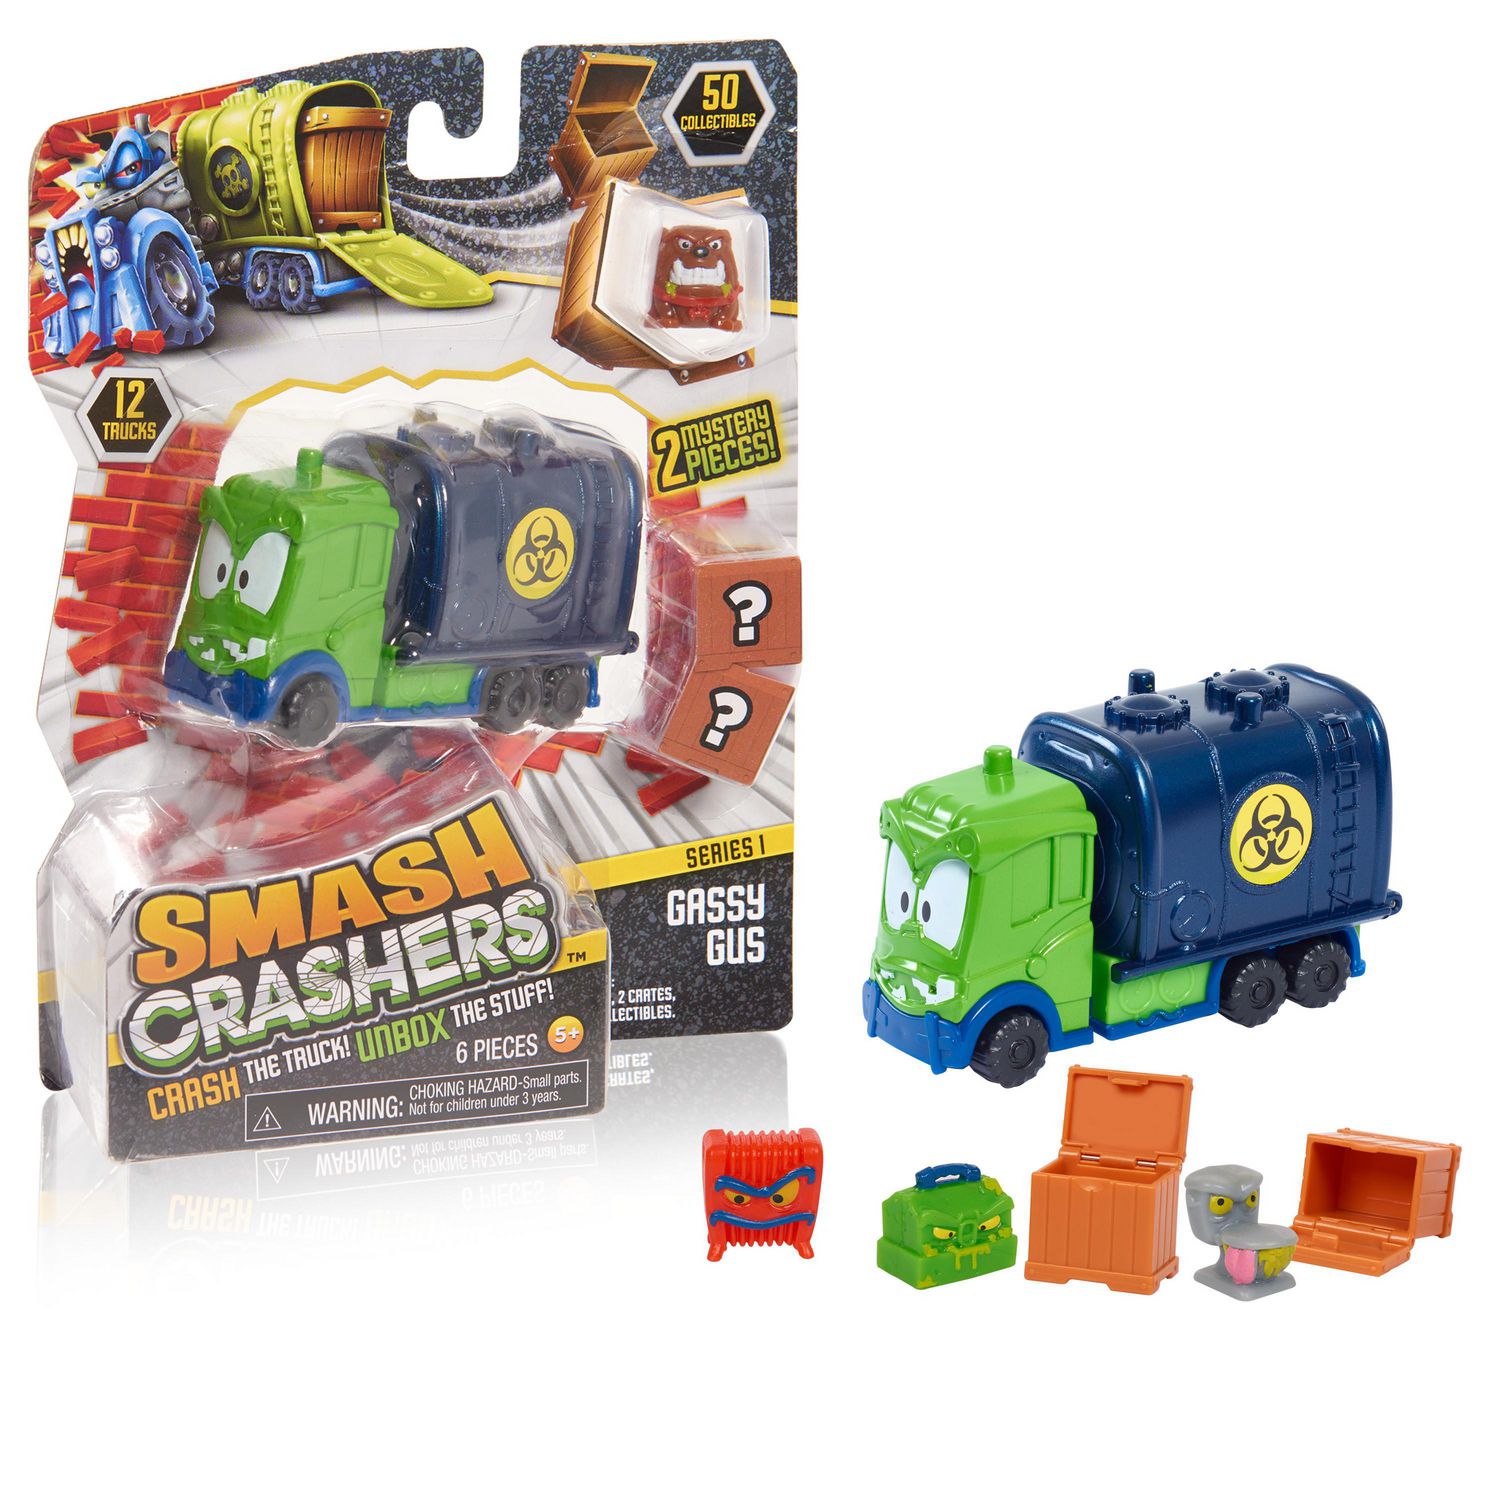 Smash Crashers Crash The Truck Unbox The Stuff Series 1 Your Choice You Pick